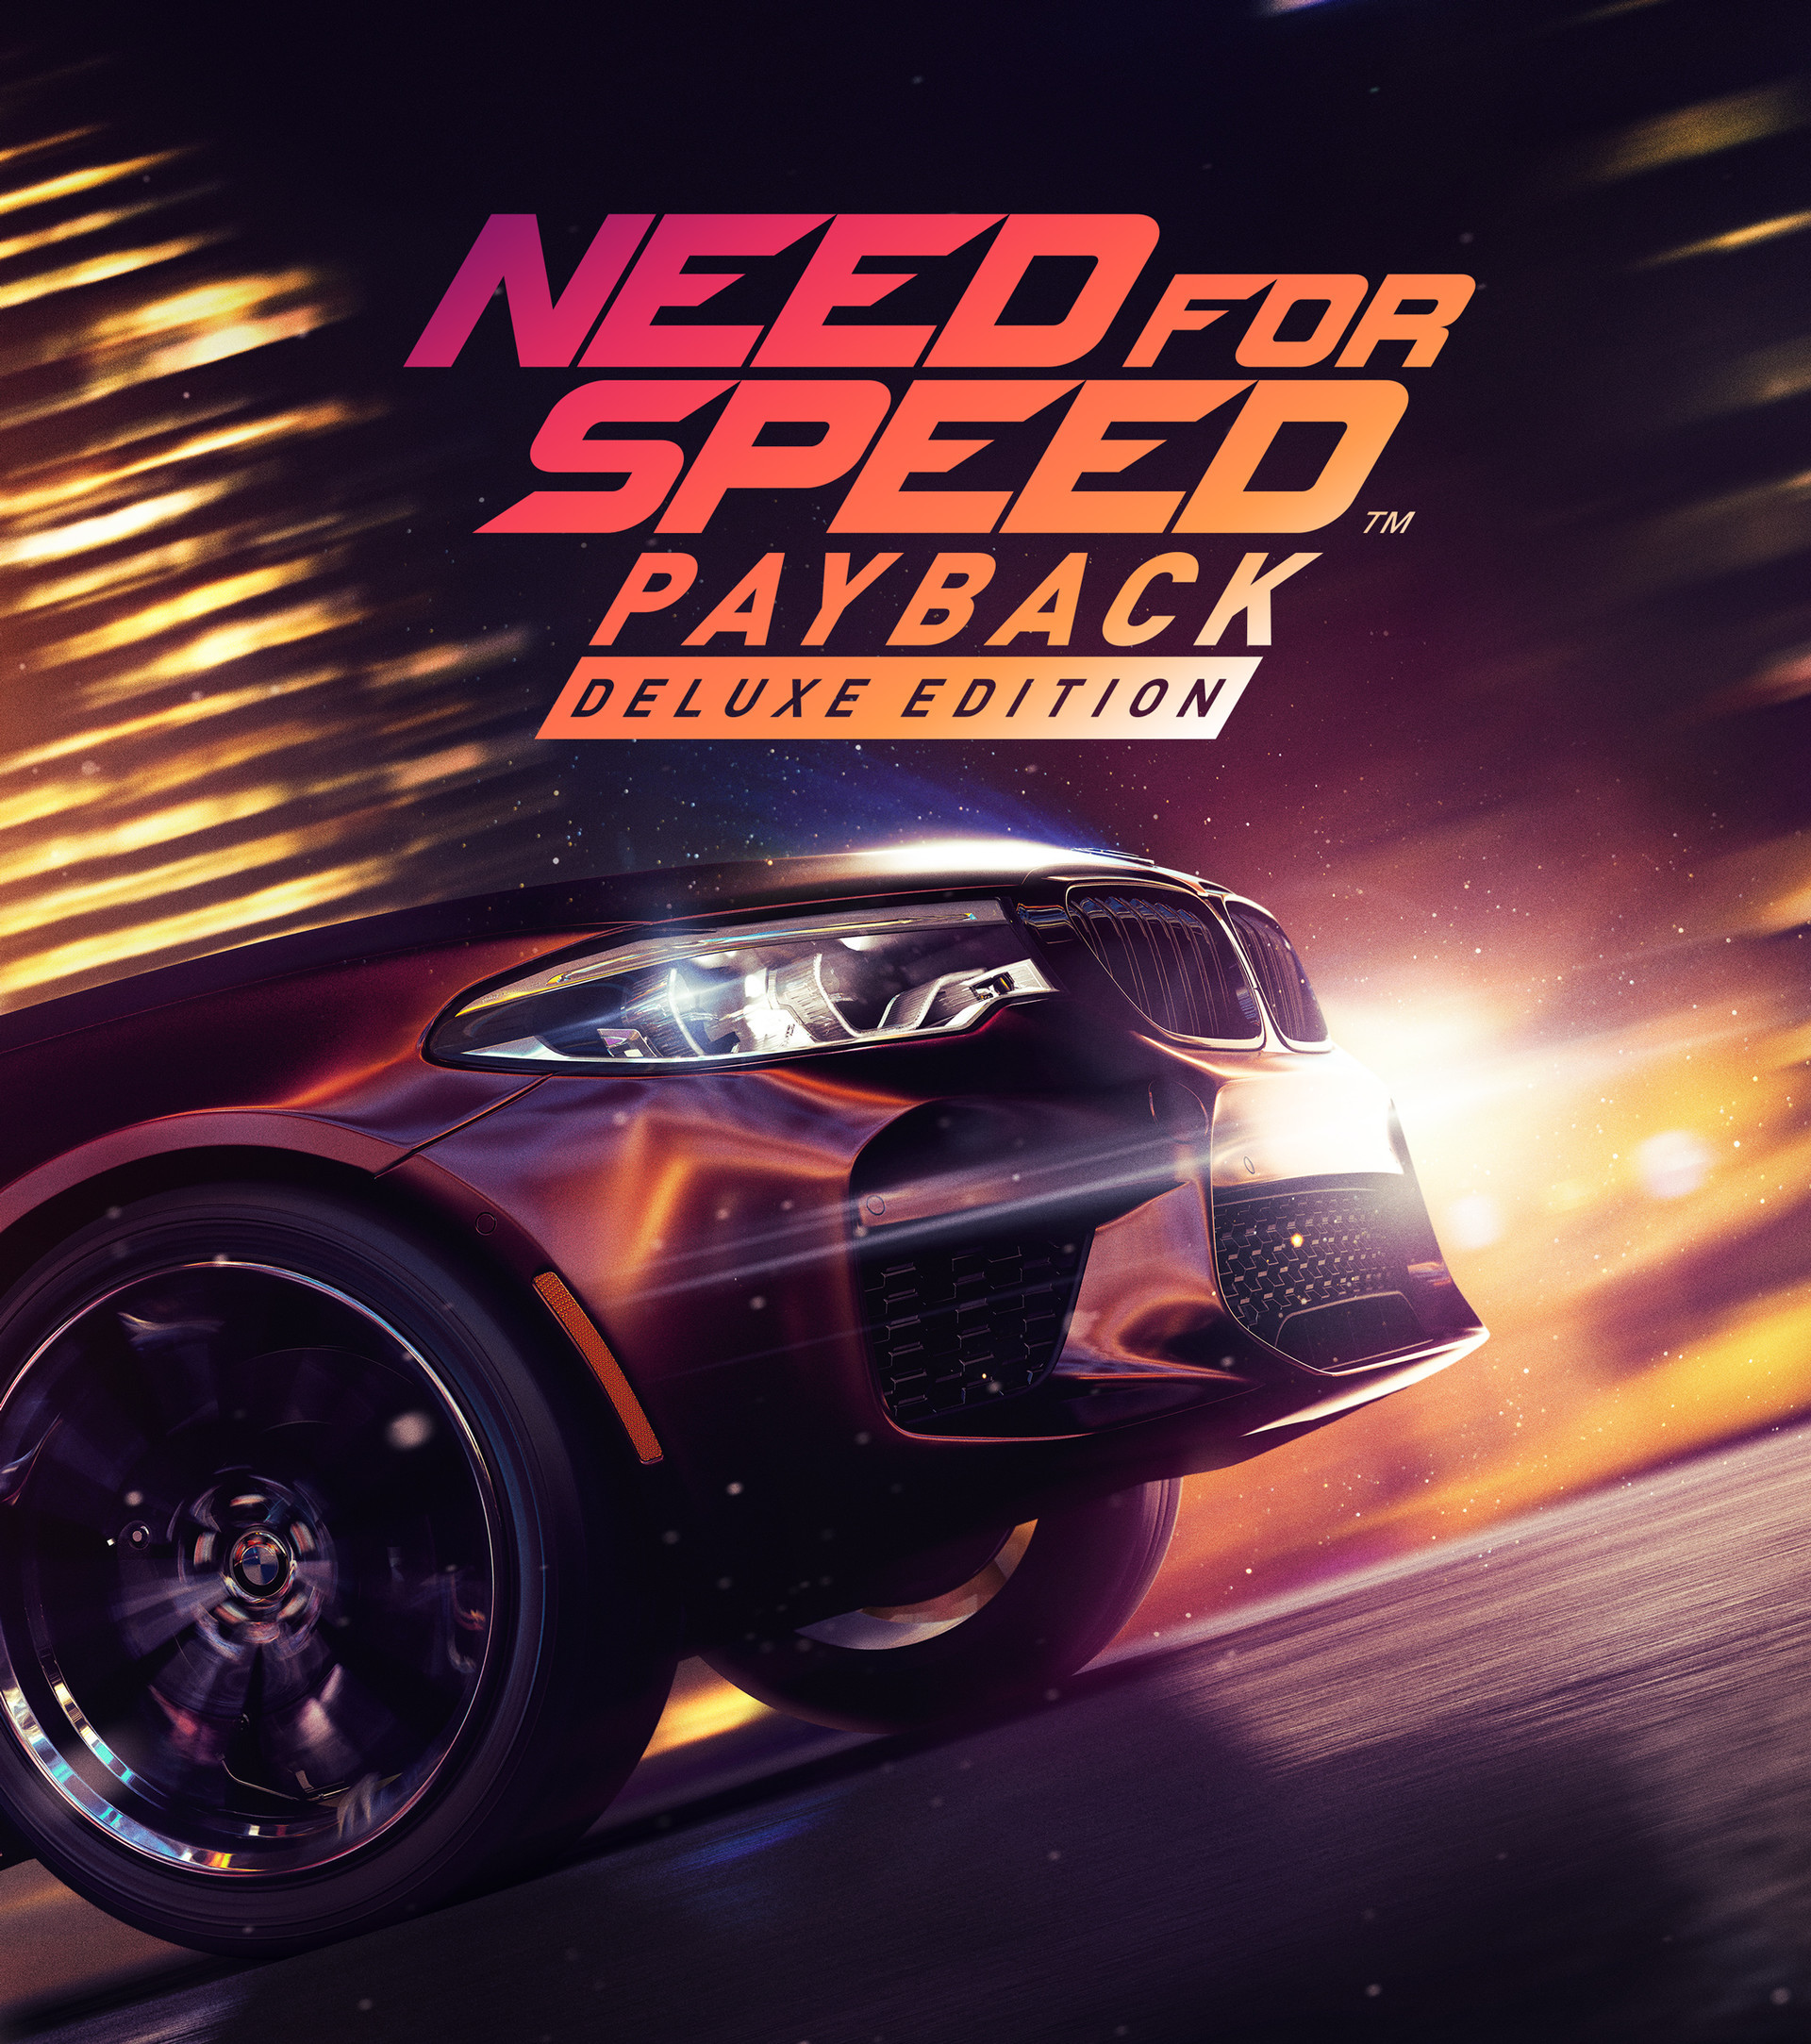 Игры nfs payback. Need for Speed Payback Deluxe Edition. BMW m5 NFS. Need for Speed пайбэк.